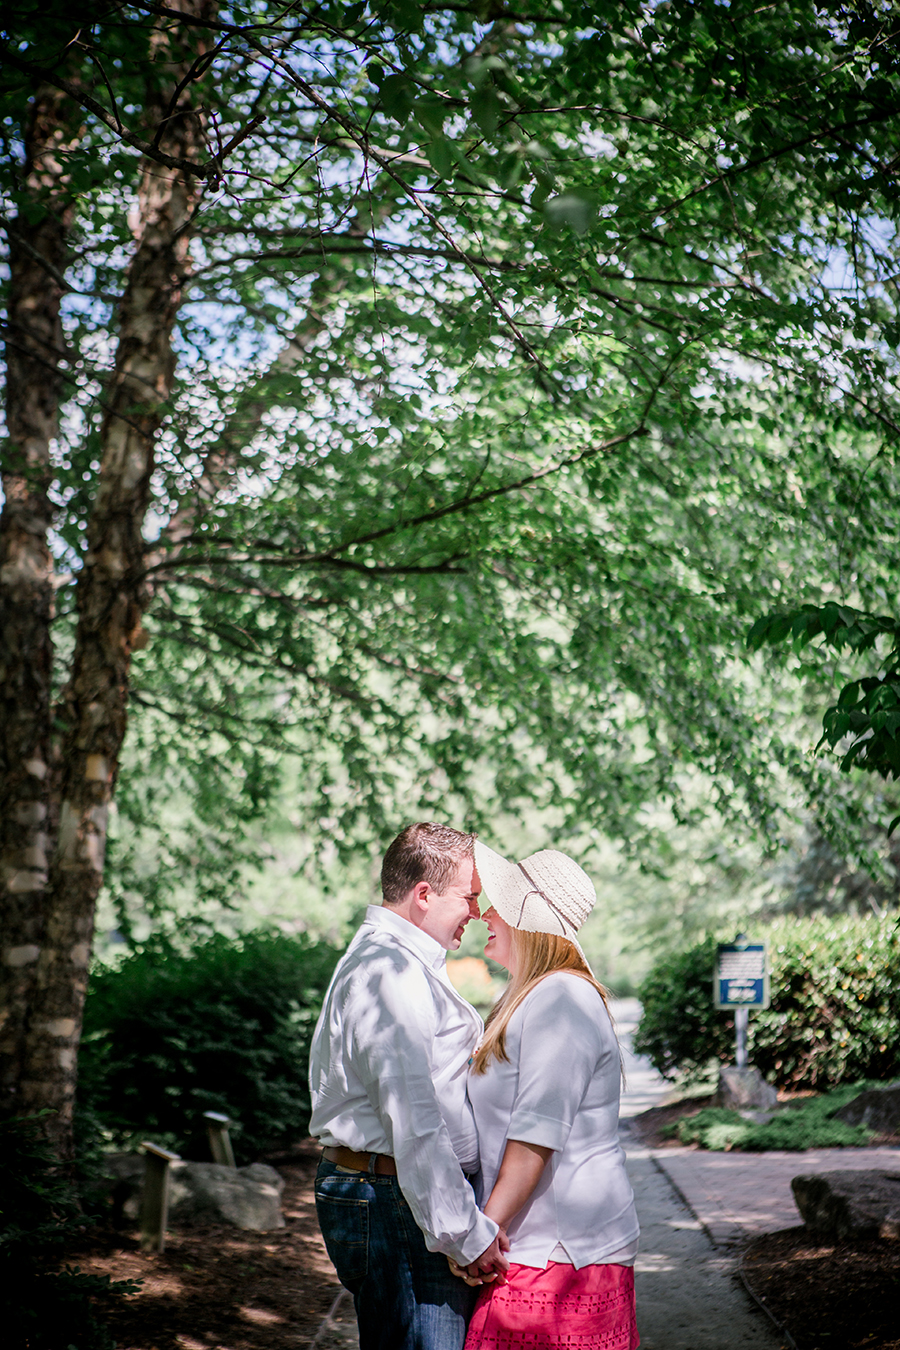 Snuggles under a shaded tree engagement photo by Knoxville Wedding Photographer, Amanda May Photos.